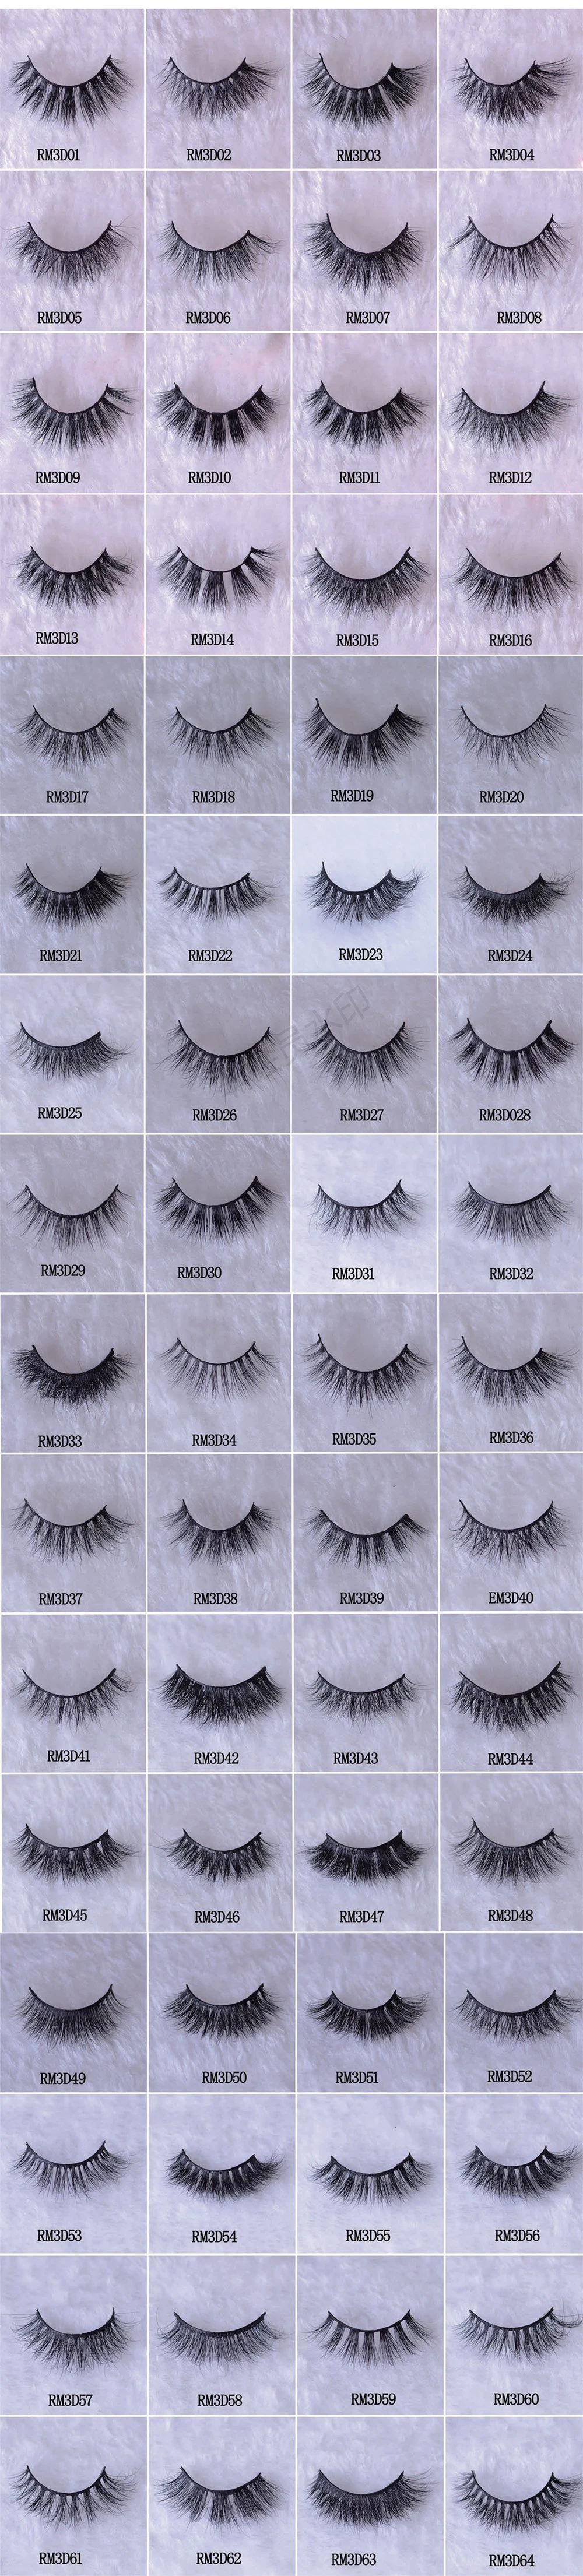 Luxurious Handmade 100% Faux Mink Lashes/Mink Lashes